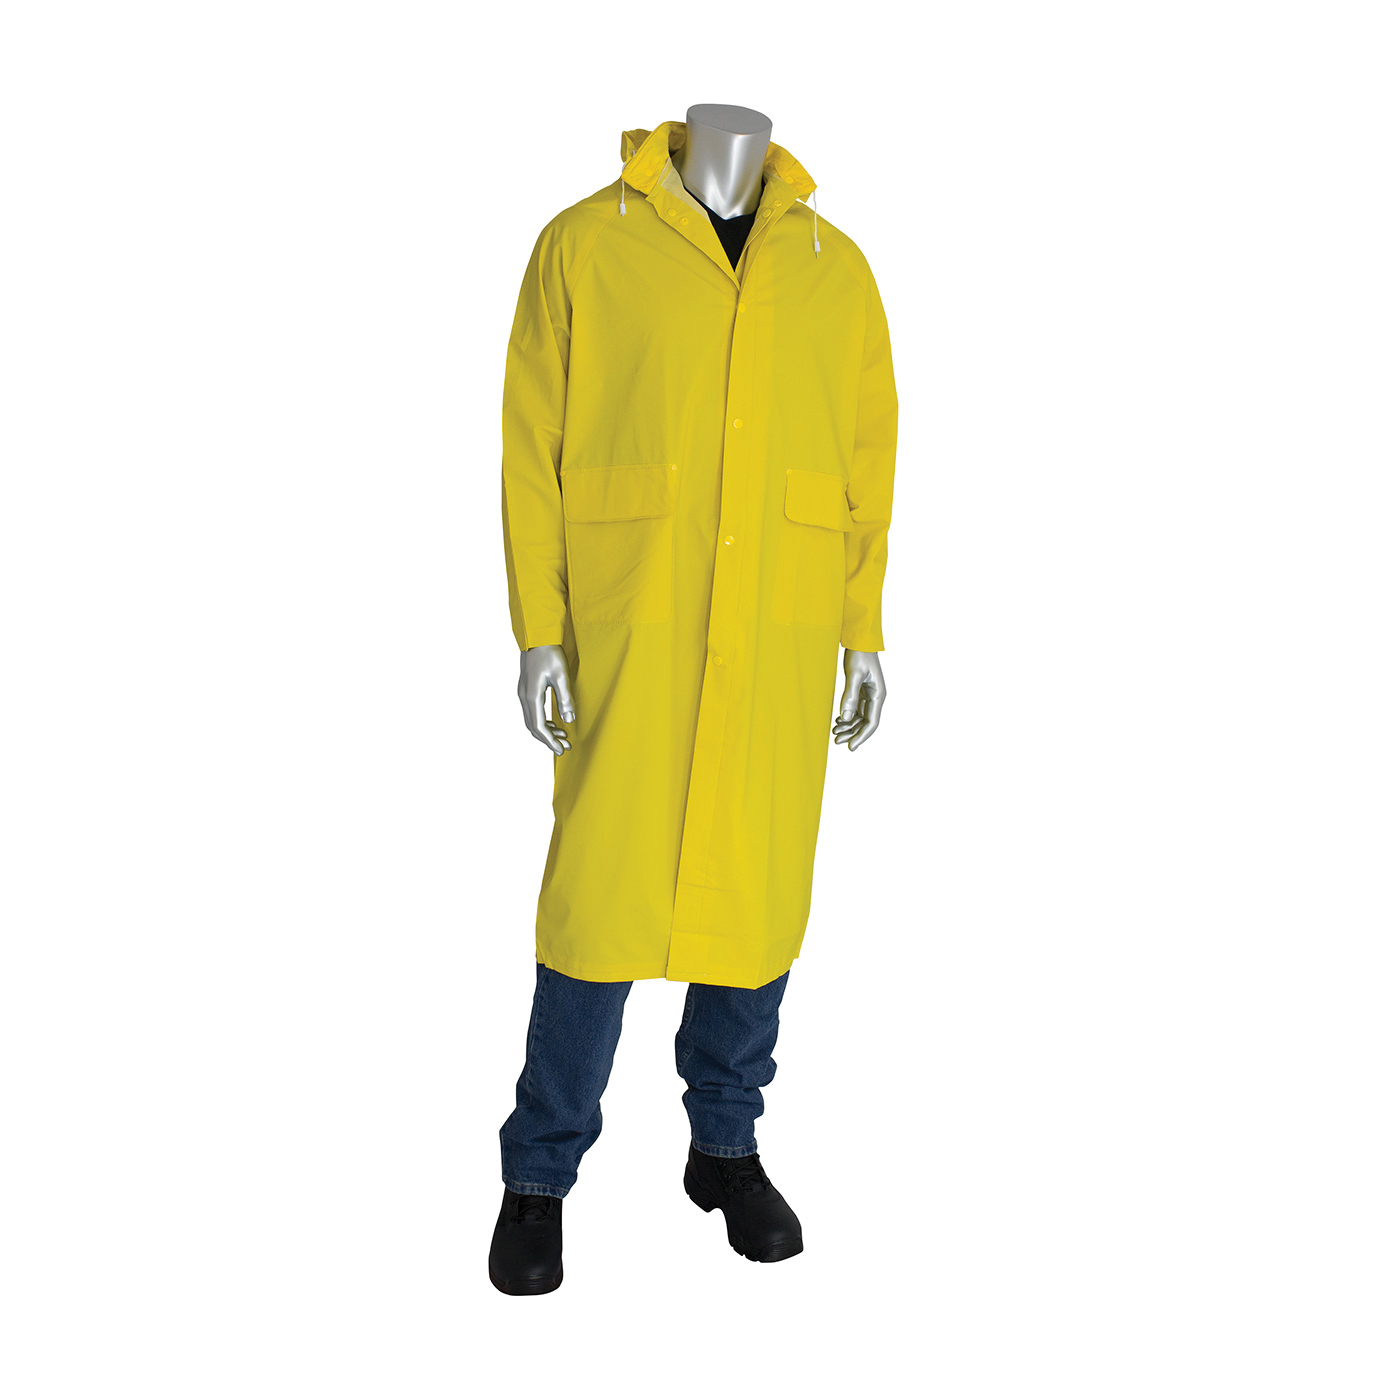 PIP® FALCON™ Base35FR™ 205-300FR/3X 2-Piece Premium Rain Coat, Unisex, 3XL, Yellow, Corduroy/Polyester/PVC, Resists: Flame and Water, Specifications Met: ASTM D6413